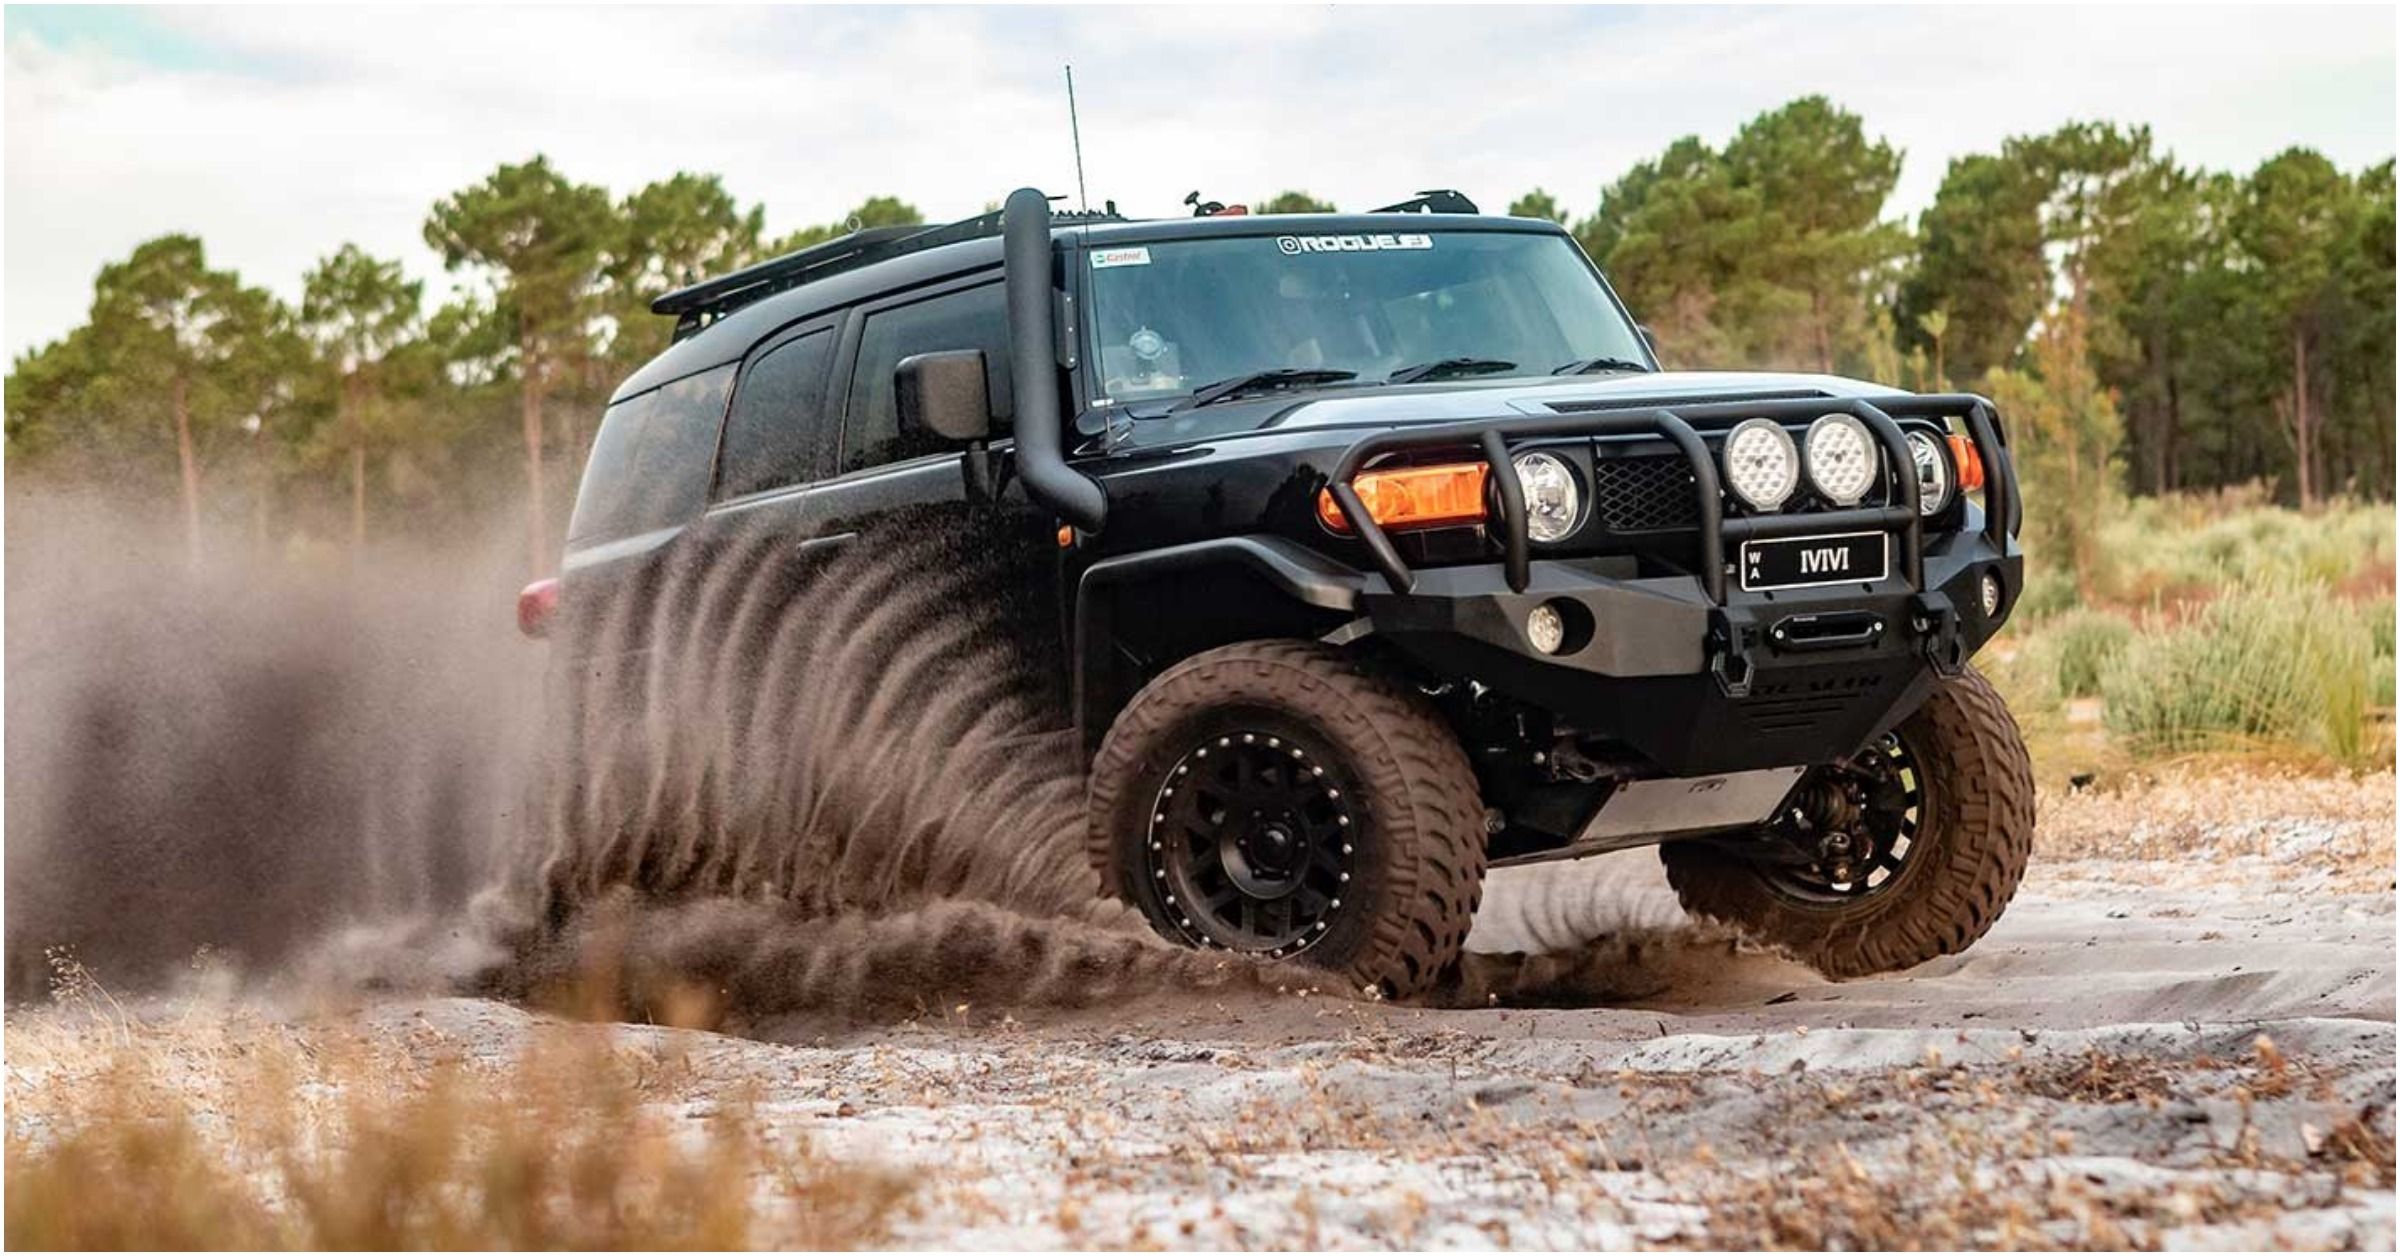 15 Cheap SUVs We'd Buy Instead Of A New Land Rover Defender